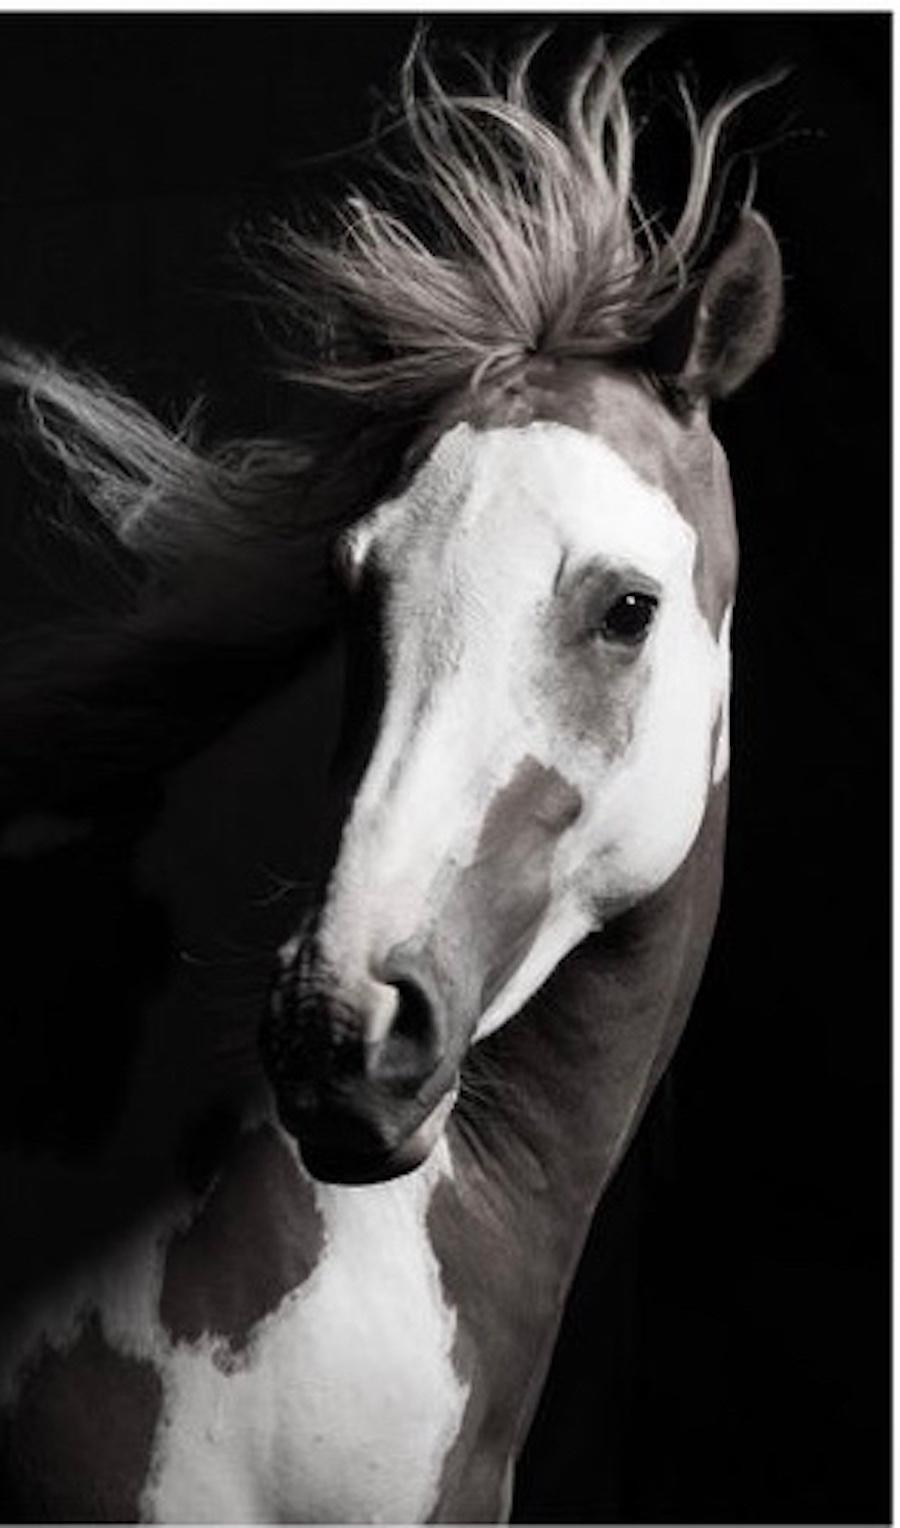 The magnificent, horse portrait by photographer Lisa Houlgrave, features Lili, the two year old daughter of RJ Masterbug in Viggo Mortensen's film, Hidalgo.
